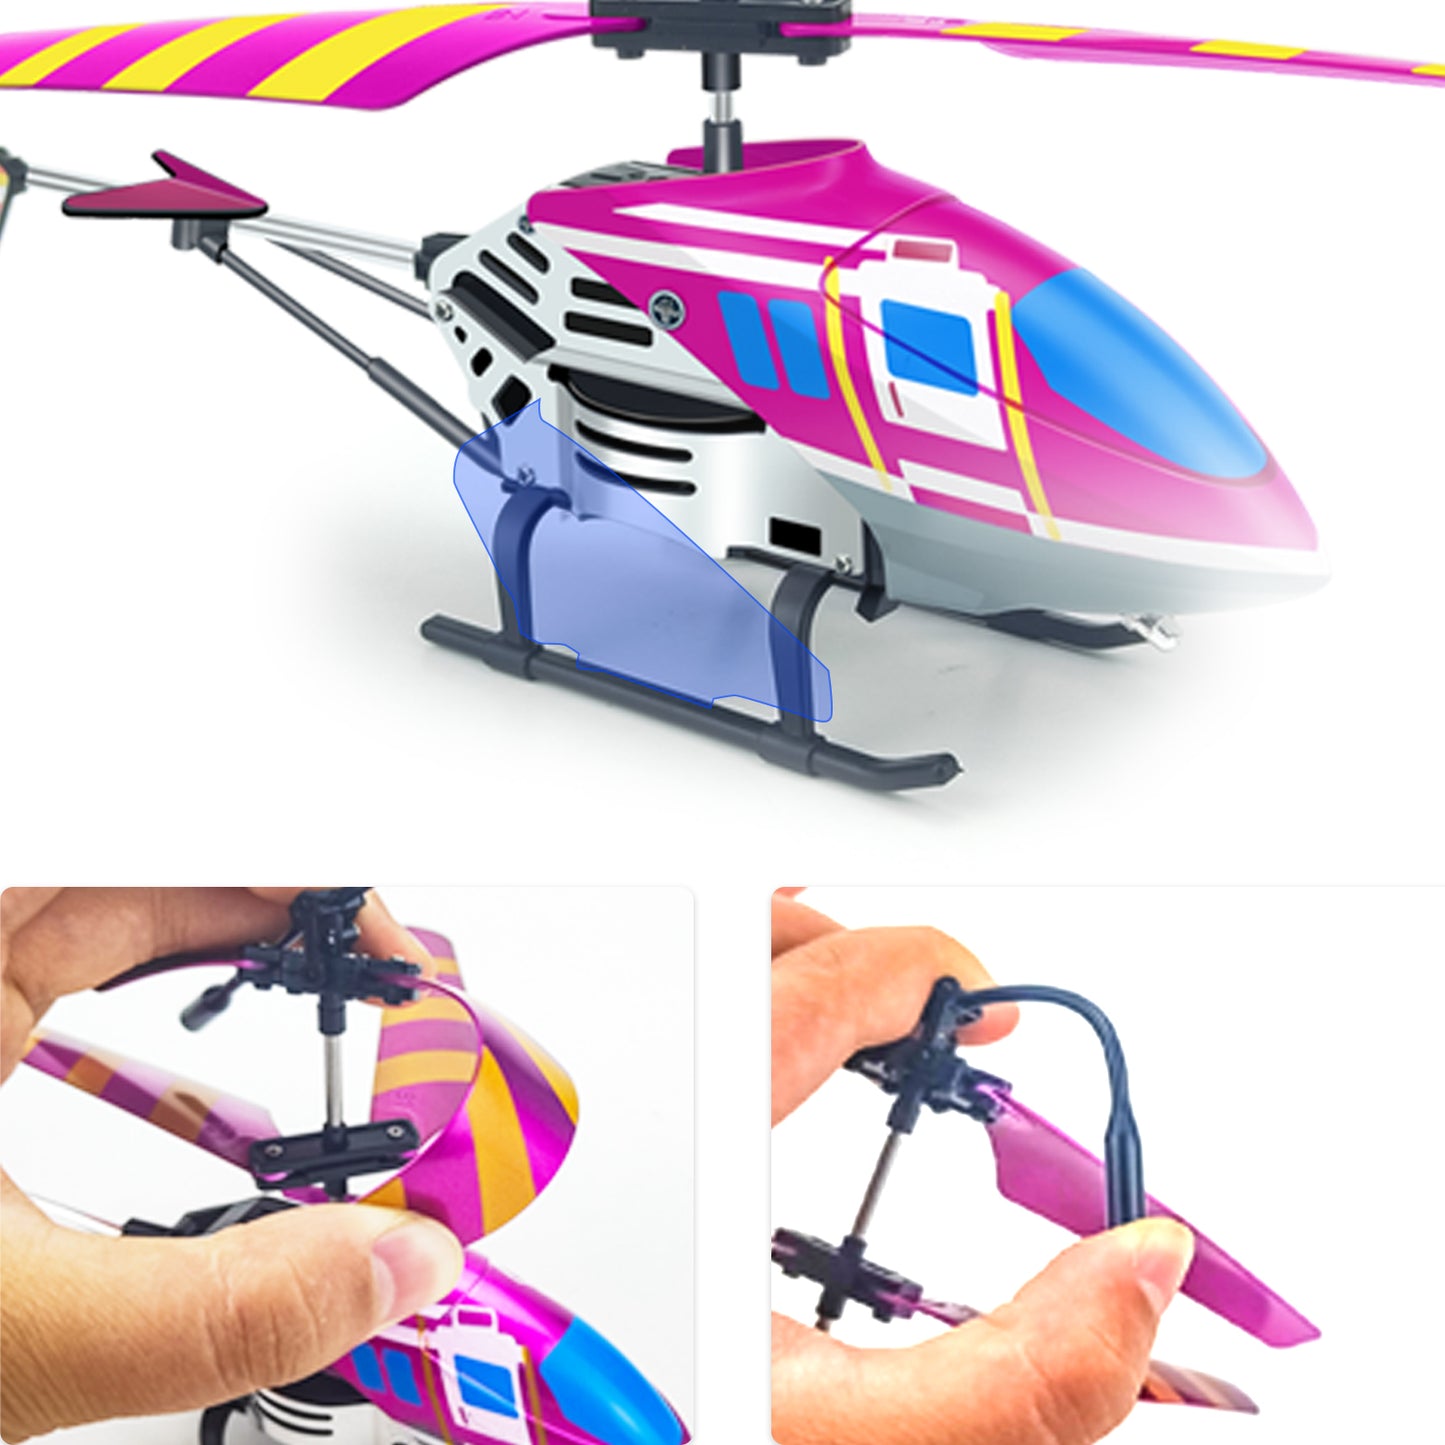 "Remote Control Helicopter, RC Flying Toys for 6 7 8 9 Teens Years Old Boys Girls Birthday, 3.5 Channel RC Helicopter with Gyro for Kids Adults Beginner Flying Stabilizer Indoor-Purple "